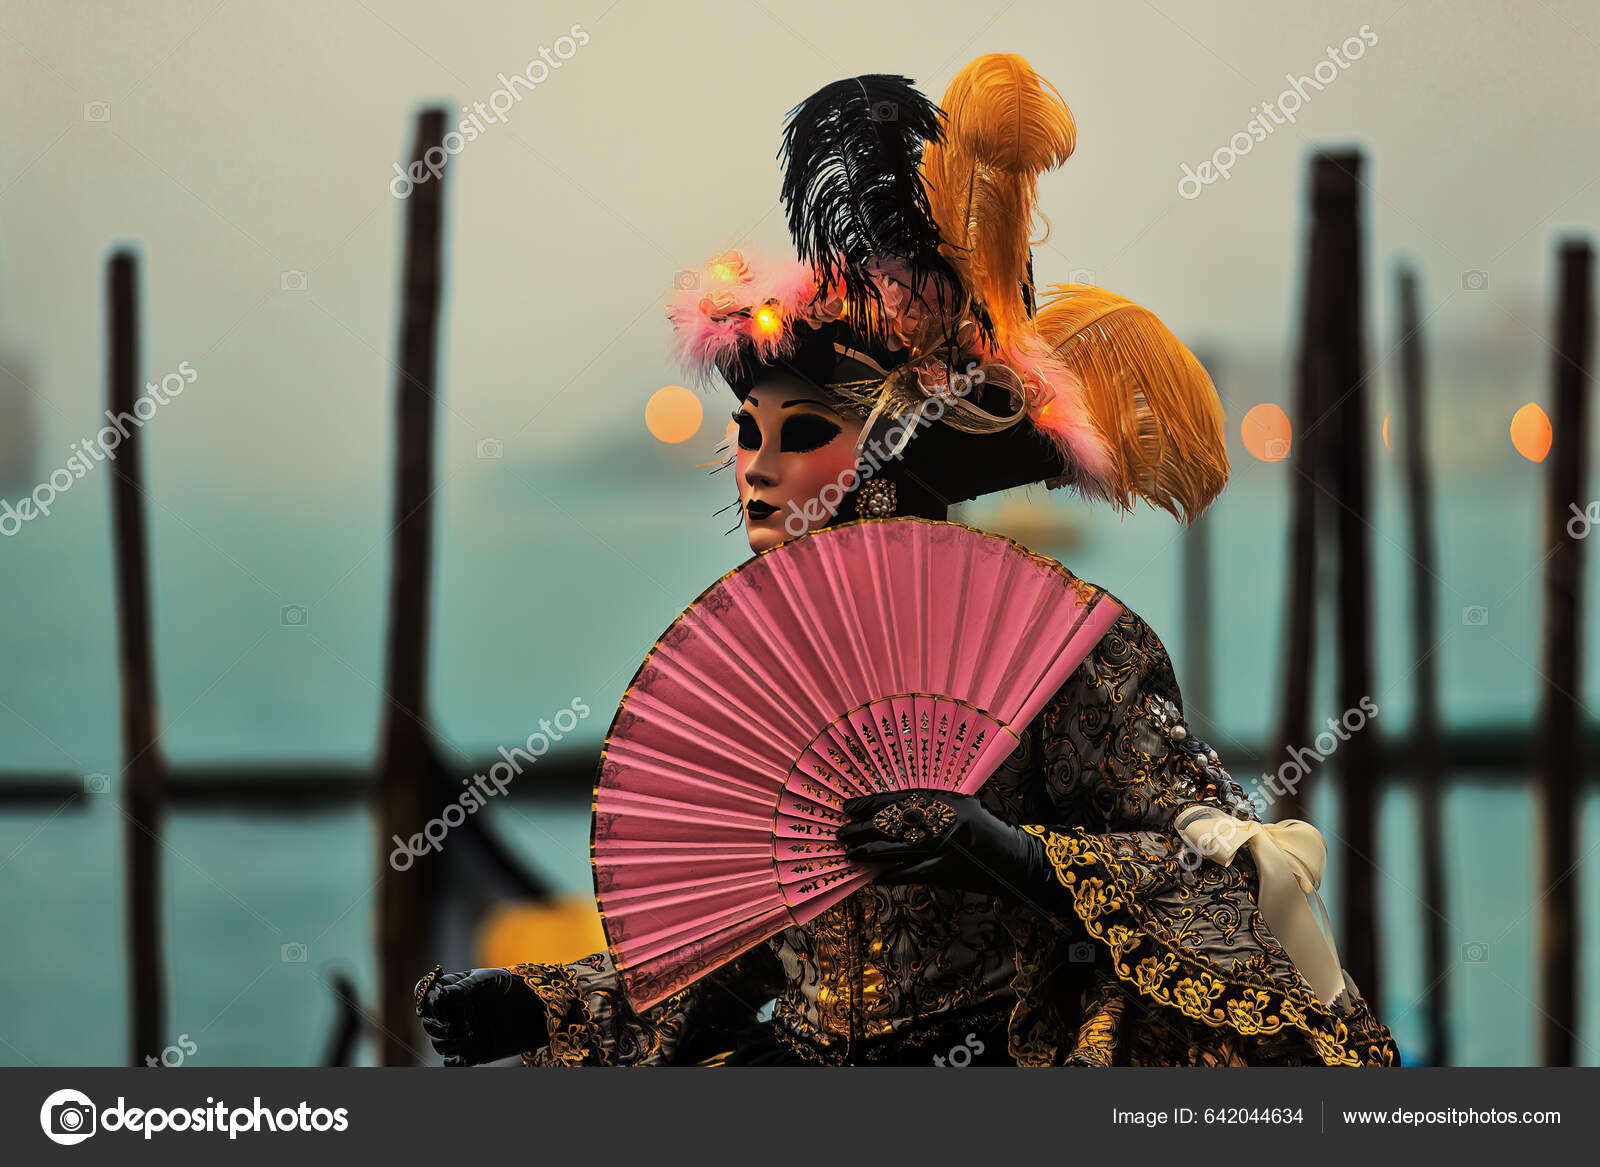 2,000 Venezia's Stock Pictures, Editorial Images and Stock Photos